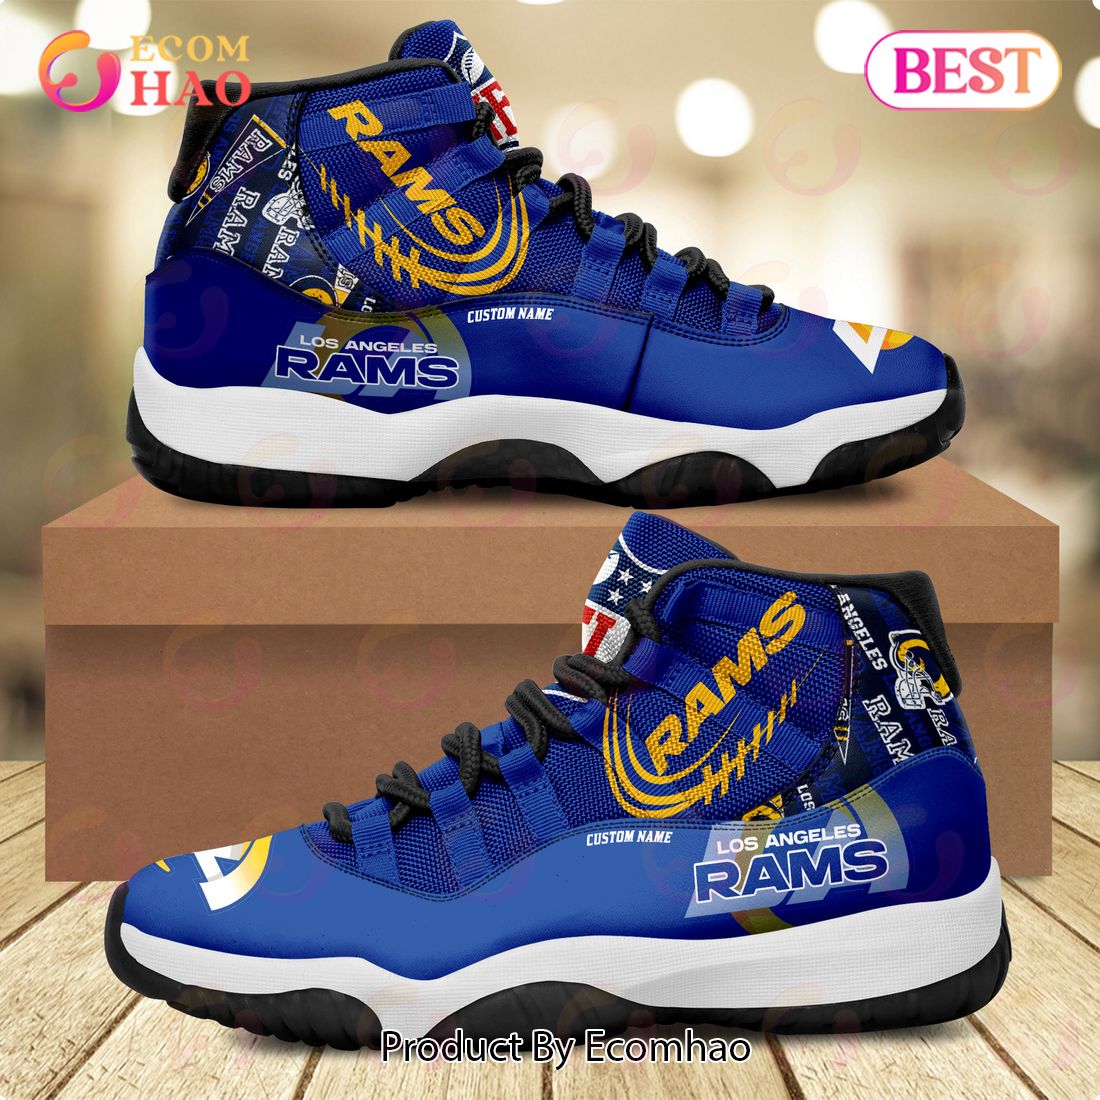 NFL Los Angeles Rams Personalized Custom Name Air Jordan 11 Sneaker, Shoes  - Ecomhao Store